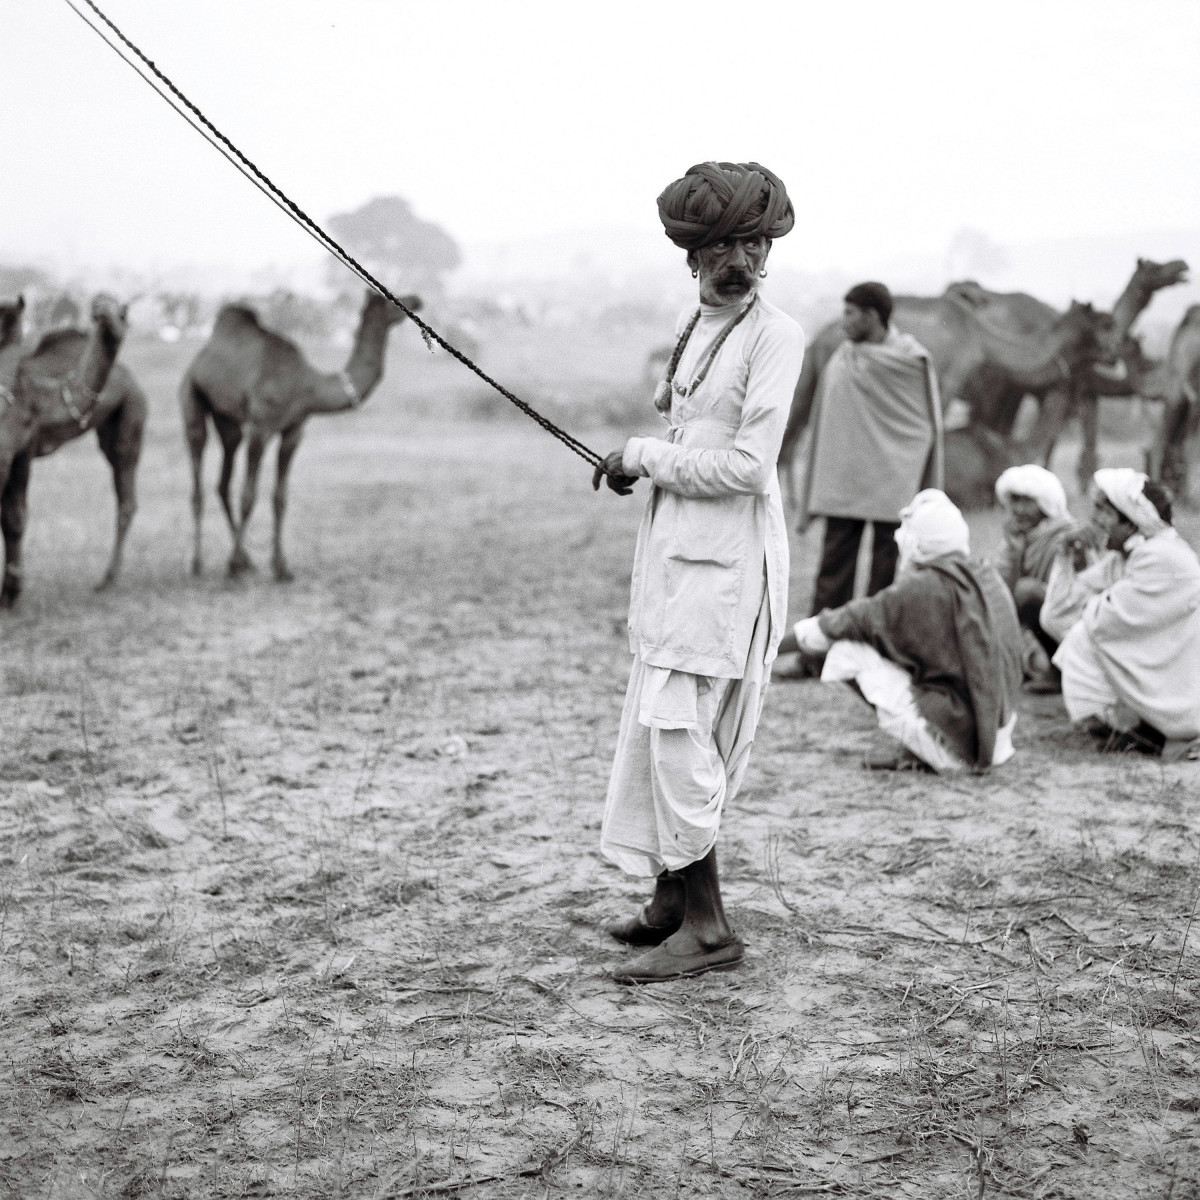 A Raika camel herder in Rajasthan, India, where camels are increasingly sold for meat and milk, despite traditional taboos against using them as a commercial food source.